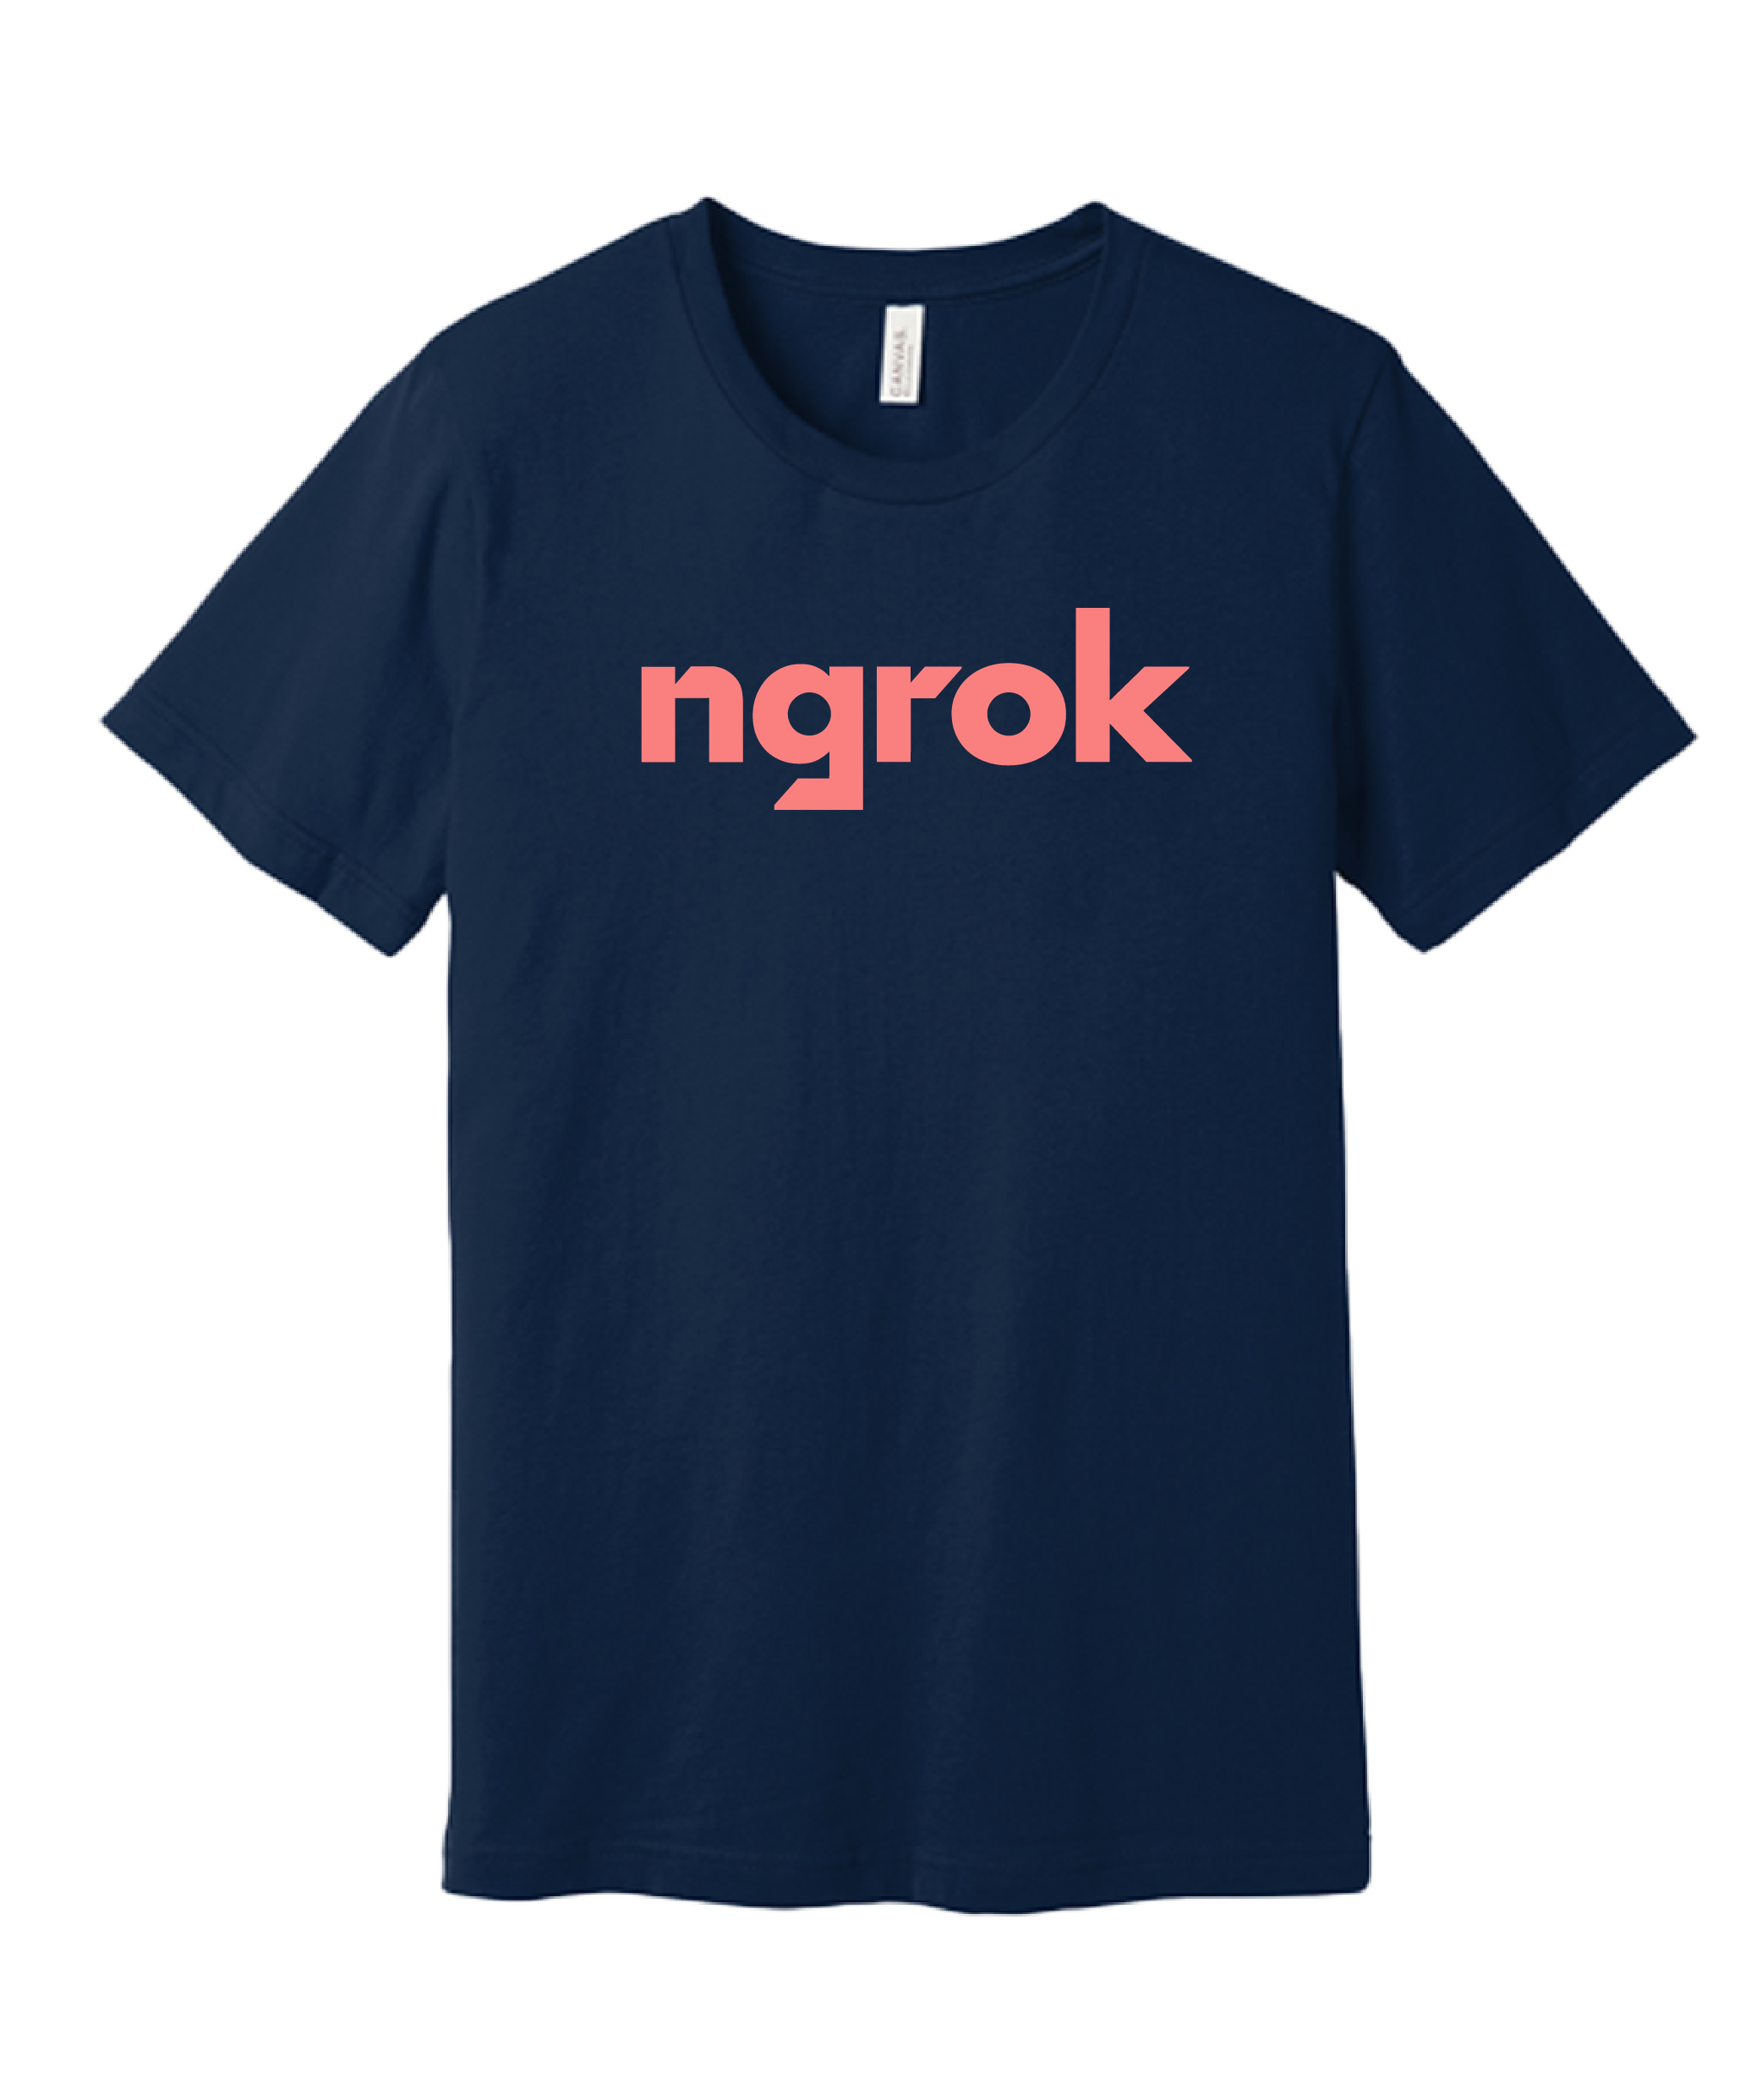 Image of Navy Shirt with Coral Logo